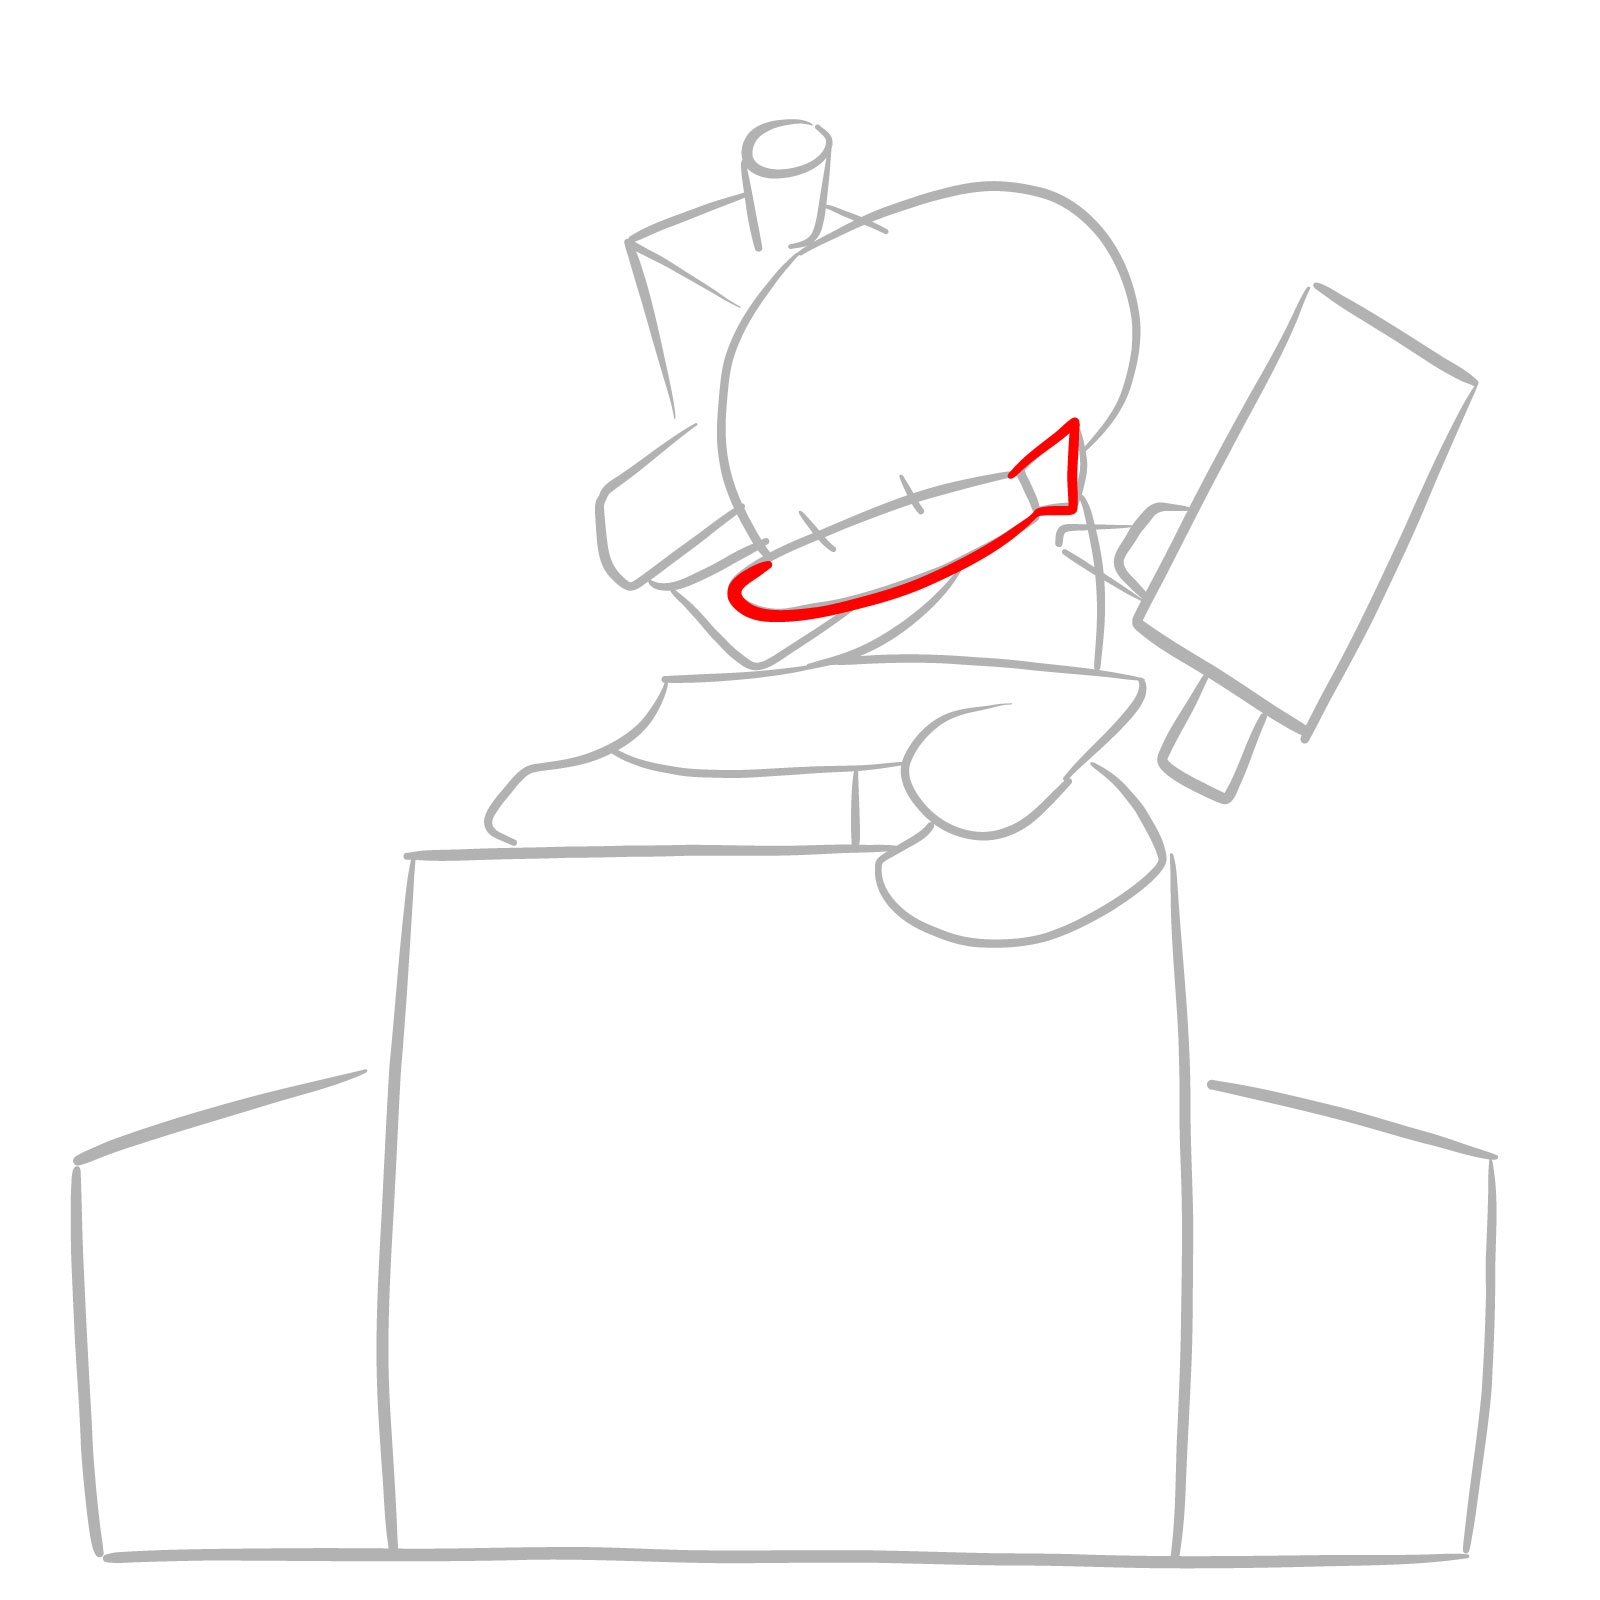 How to draw Pico on the speakers - step 04